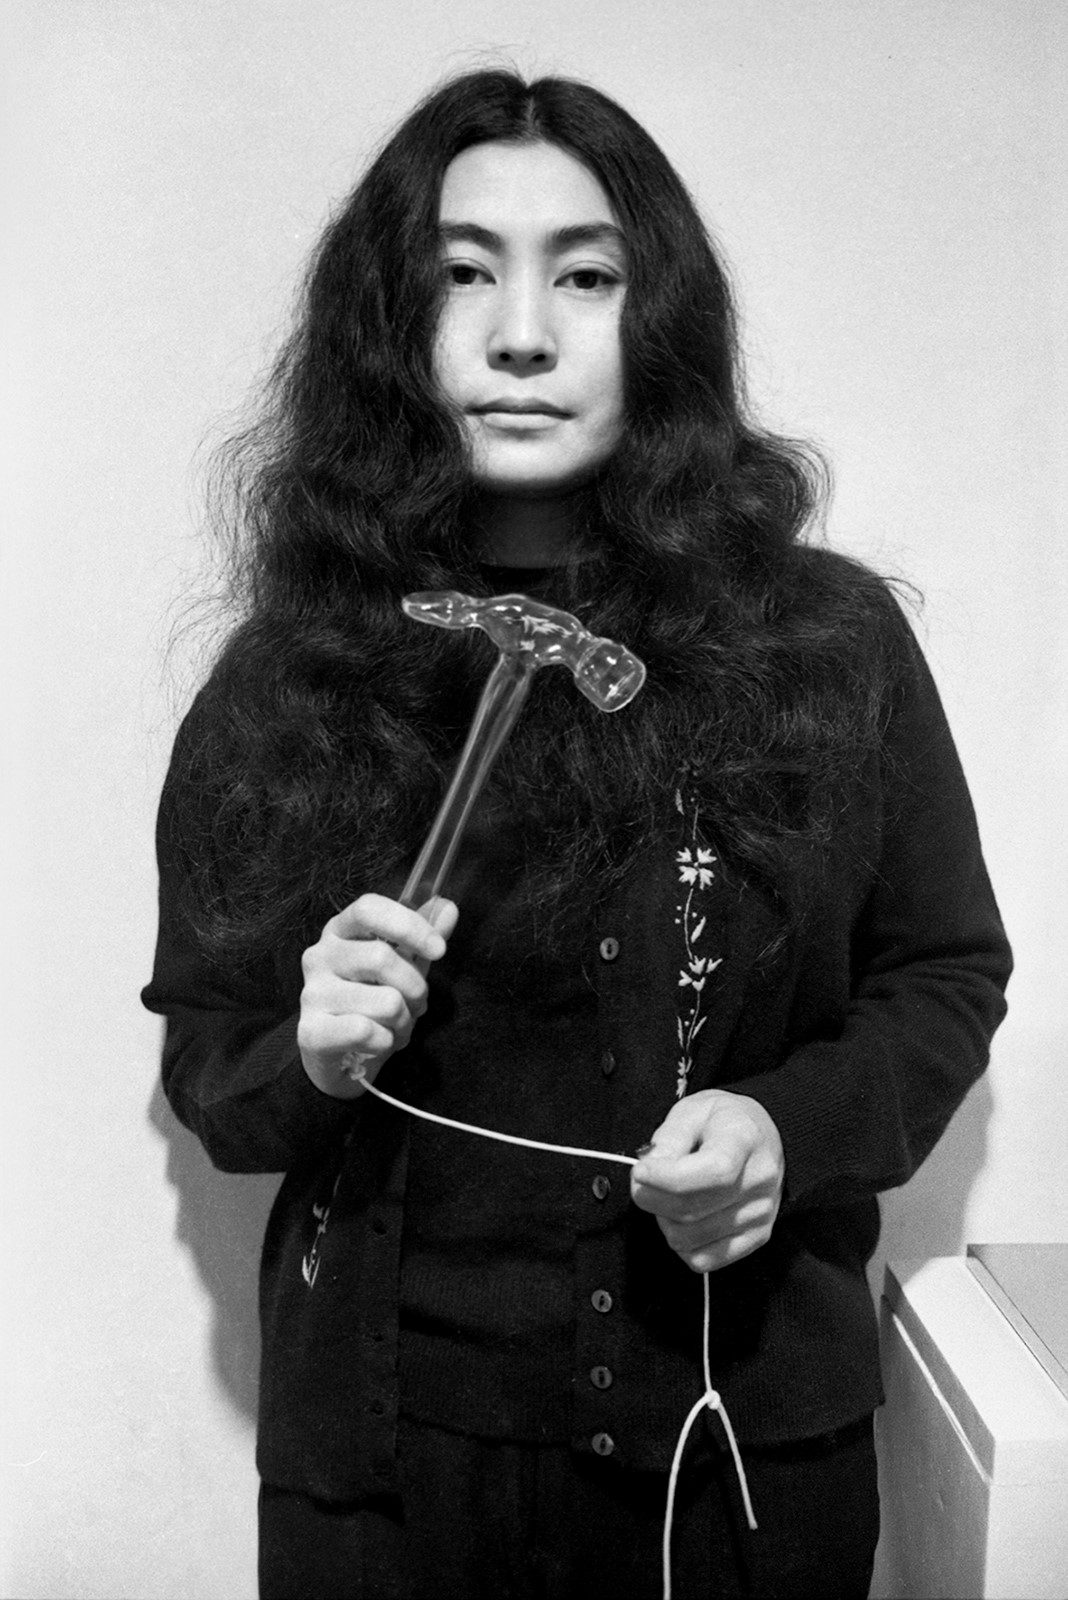 Clay Perry, Yoko Ono (with glass hammer), 1967/2021, Courtesy of England & Co